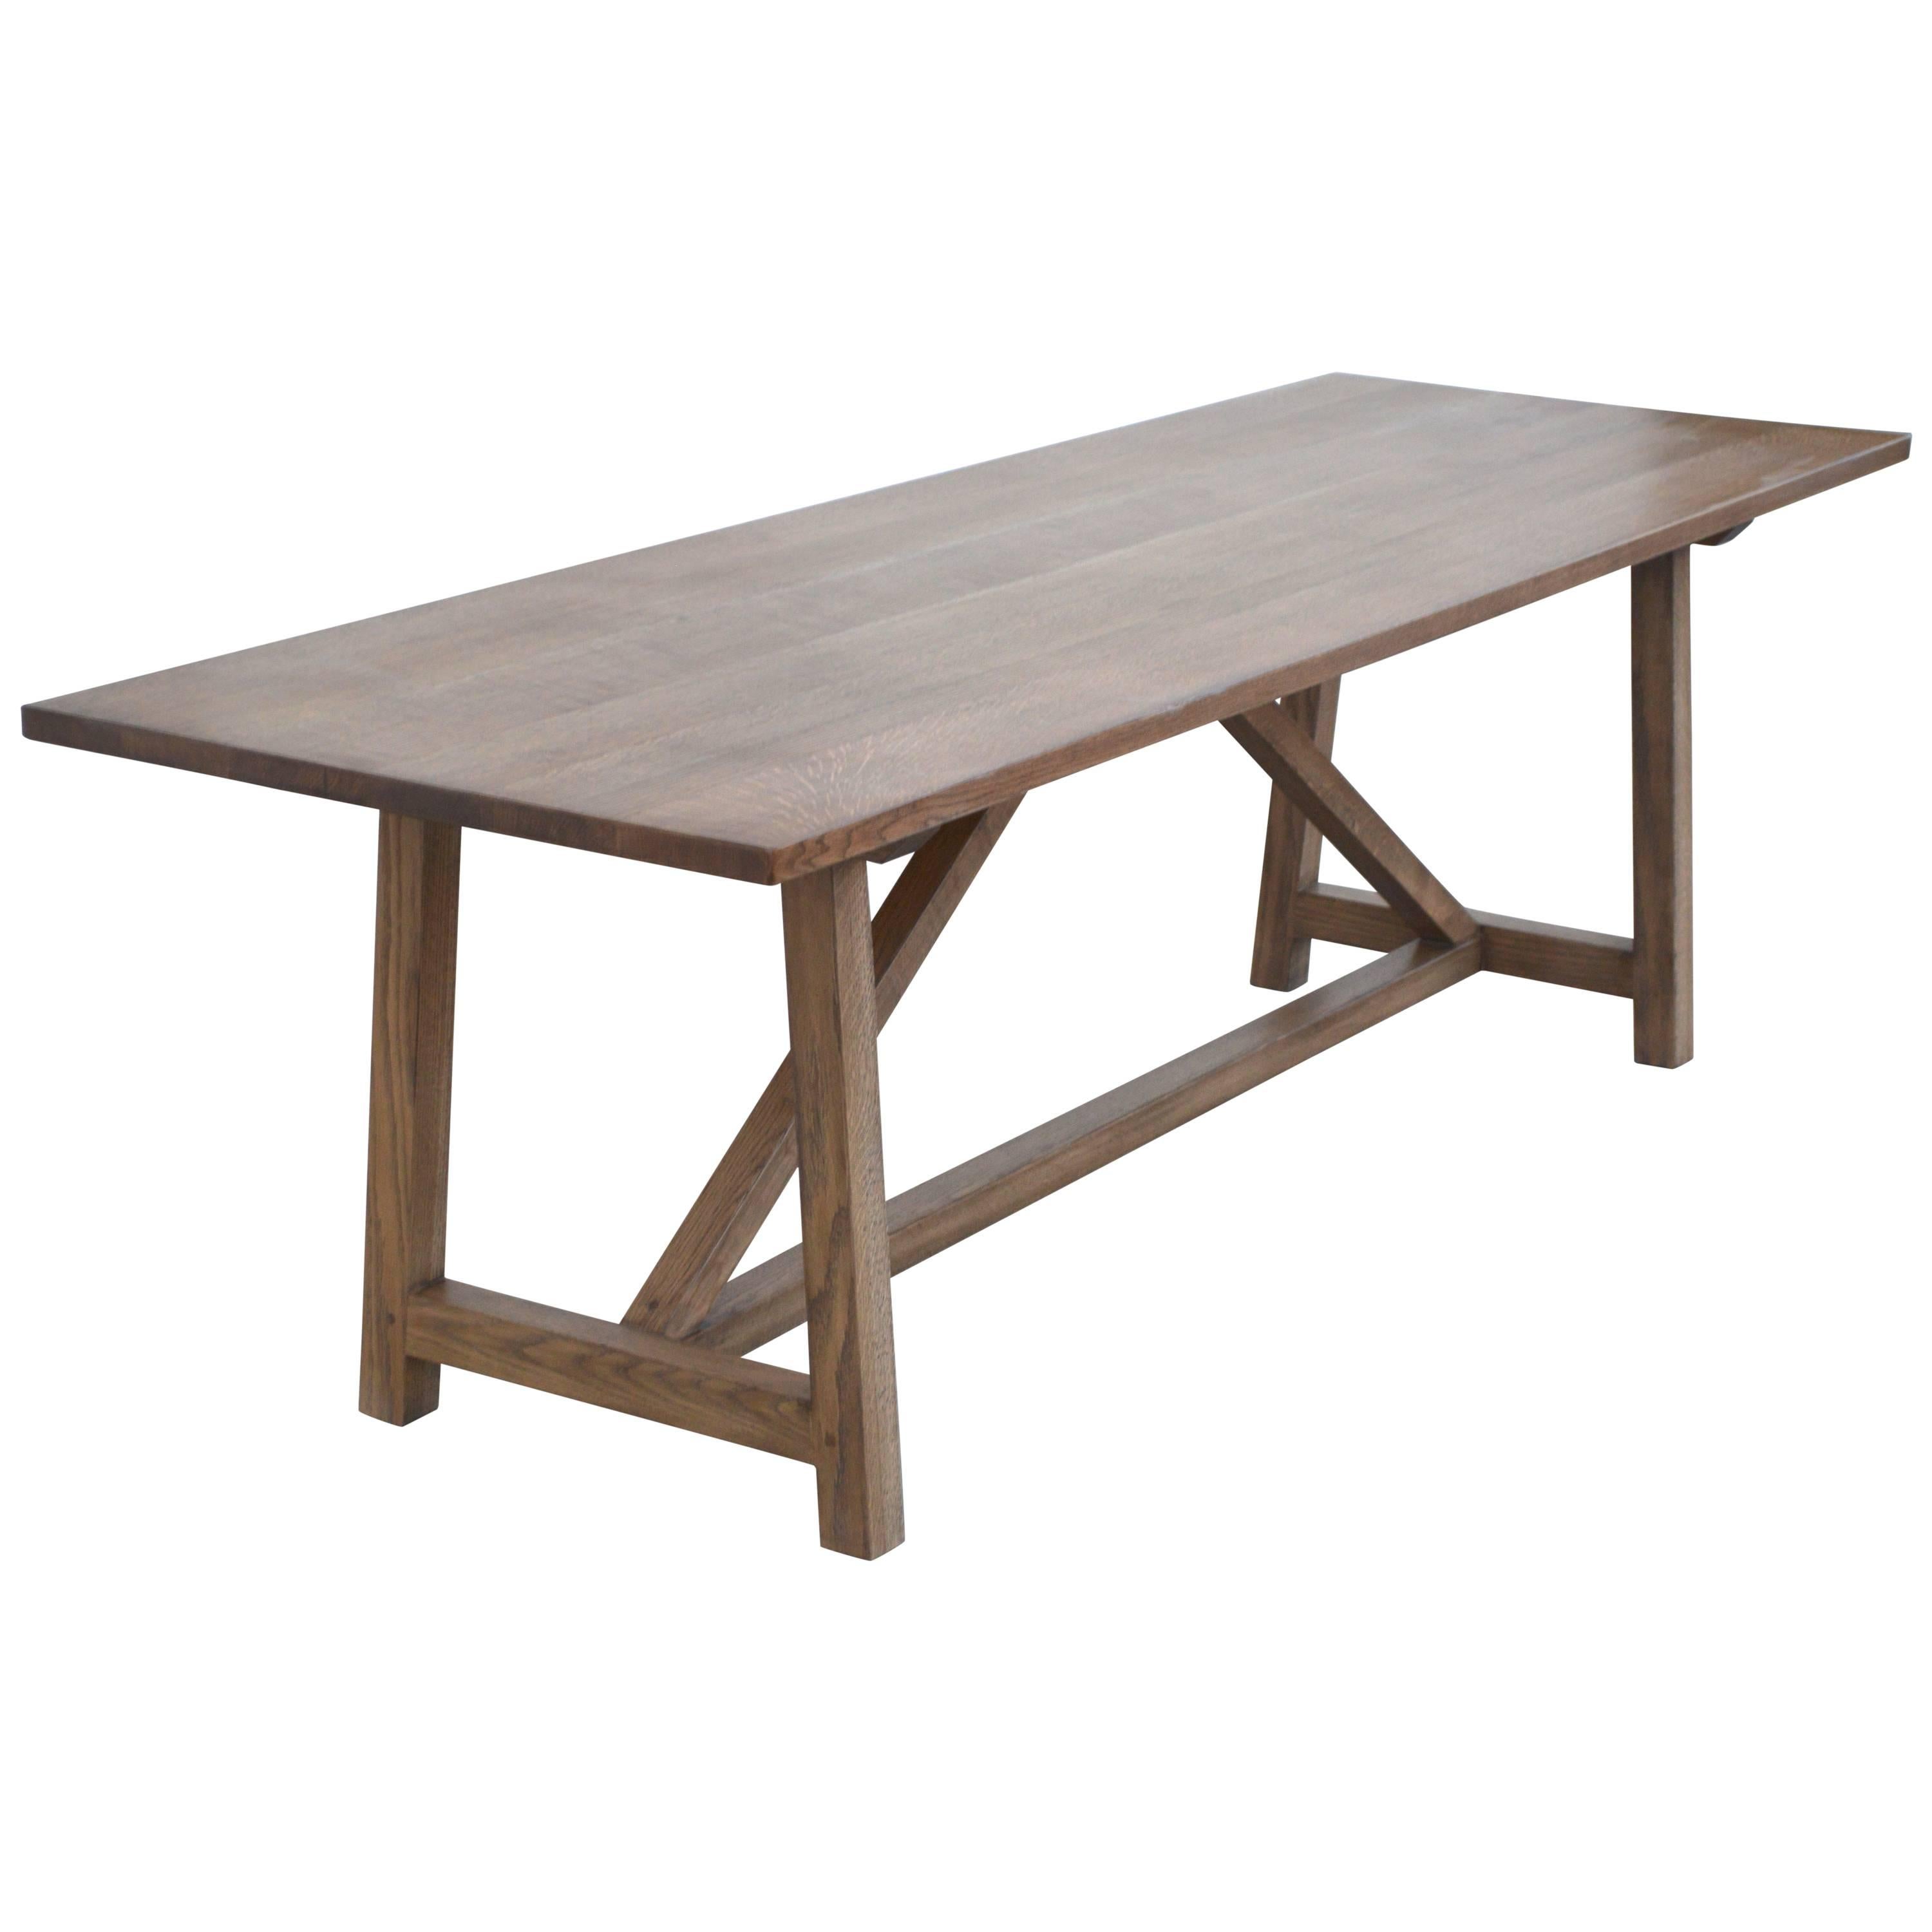 Custom Dining Table in Rift White Oak, Built to Order by Petersen Antiques